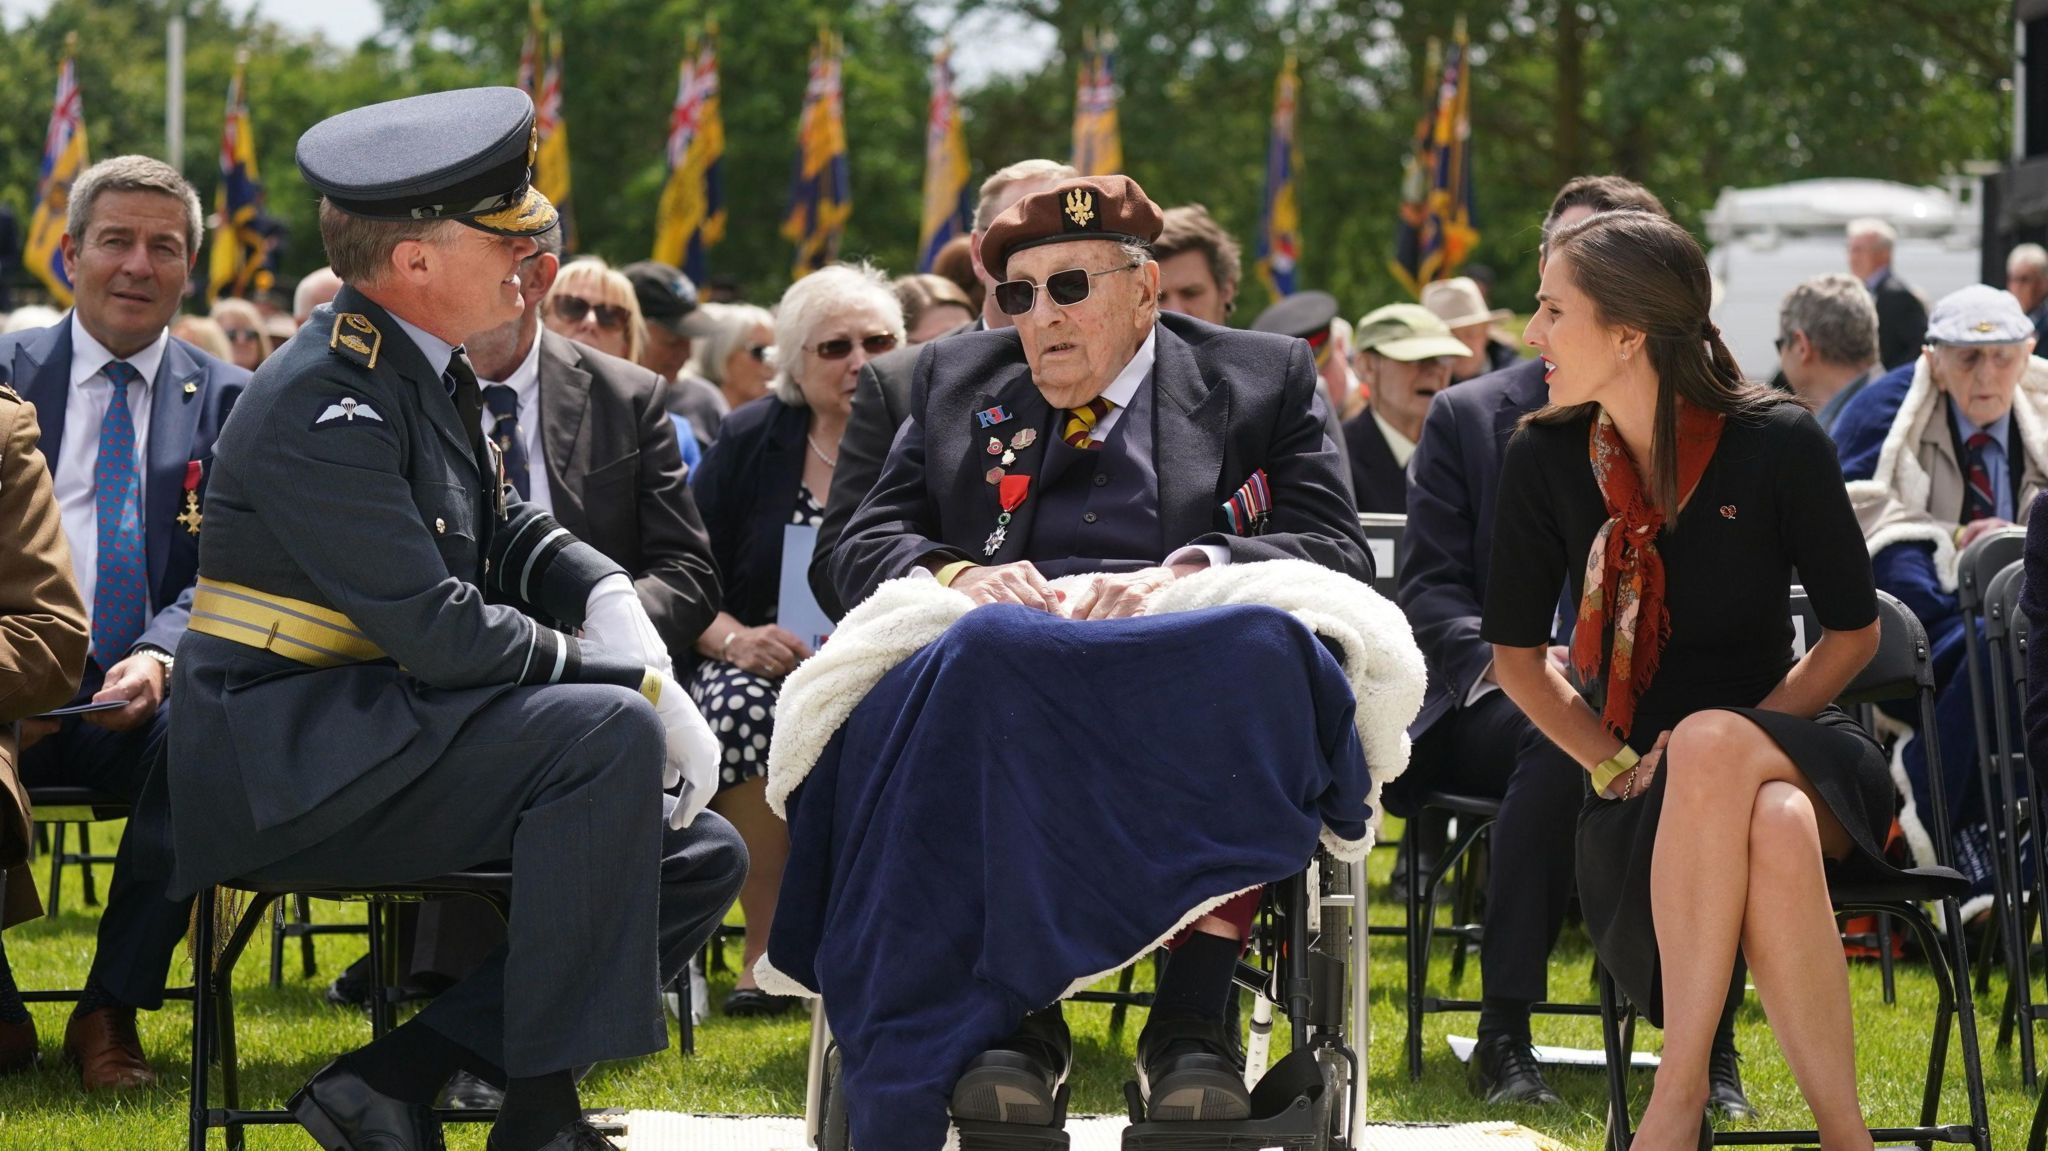 Veterans and guests during the Royal British Legion's service of remembrance at the National Memorial Arboretum in Alrewas, Staffordshire